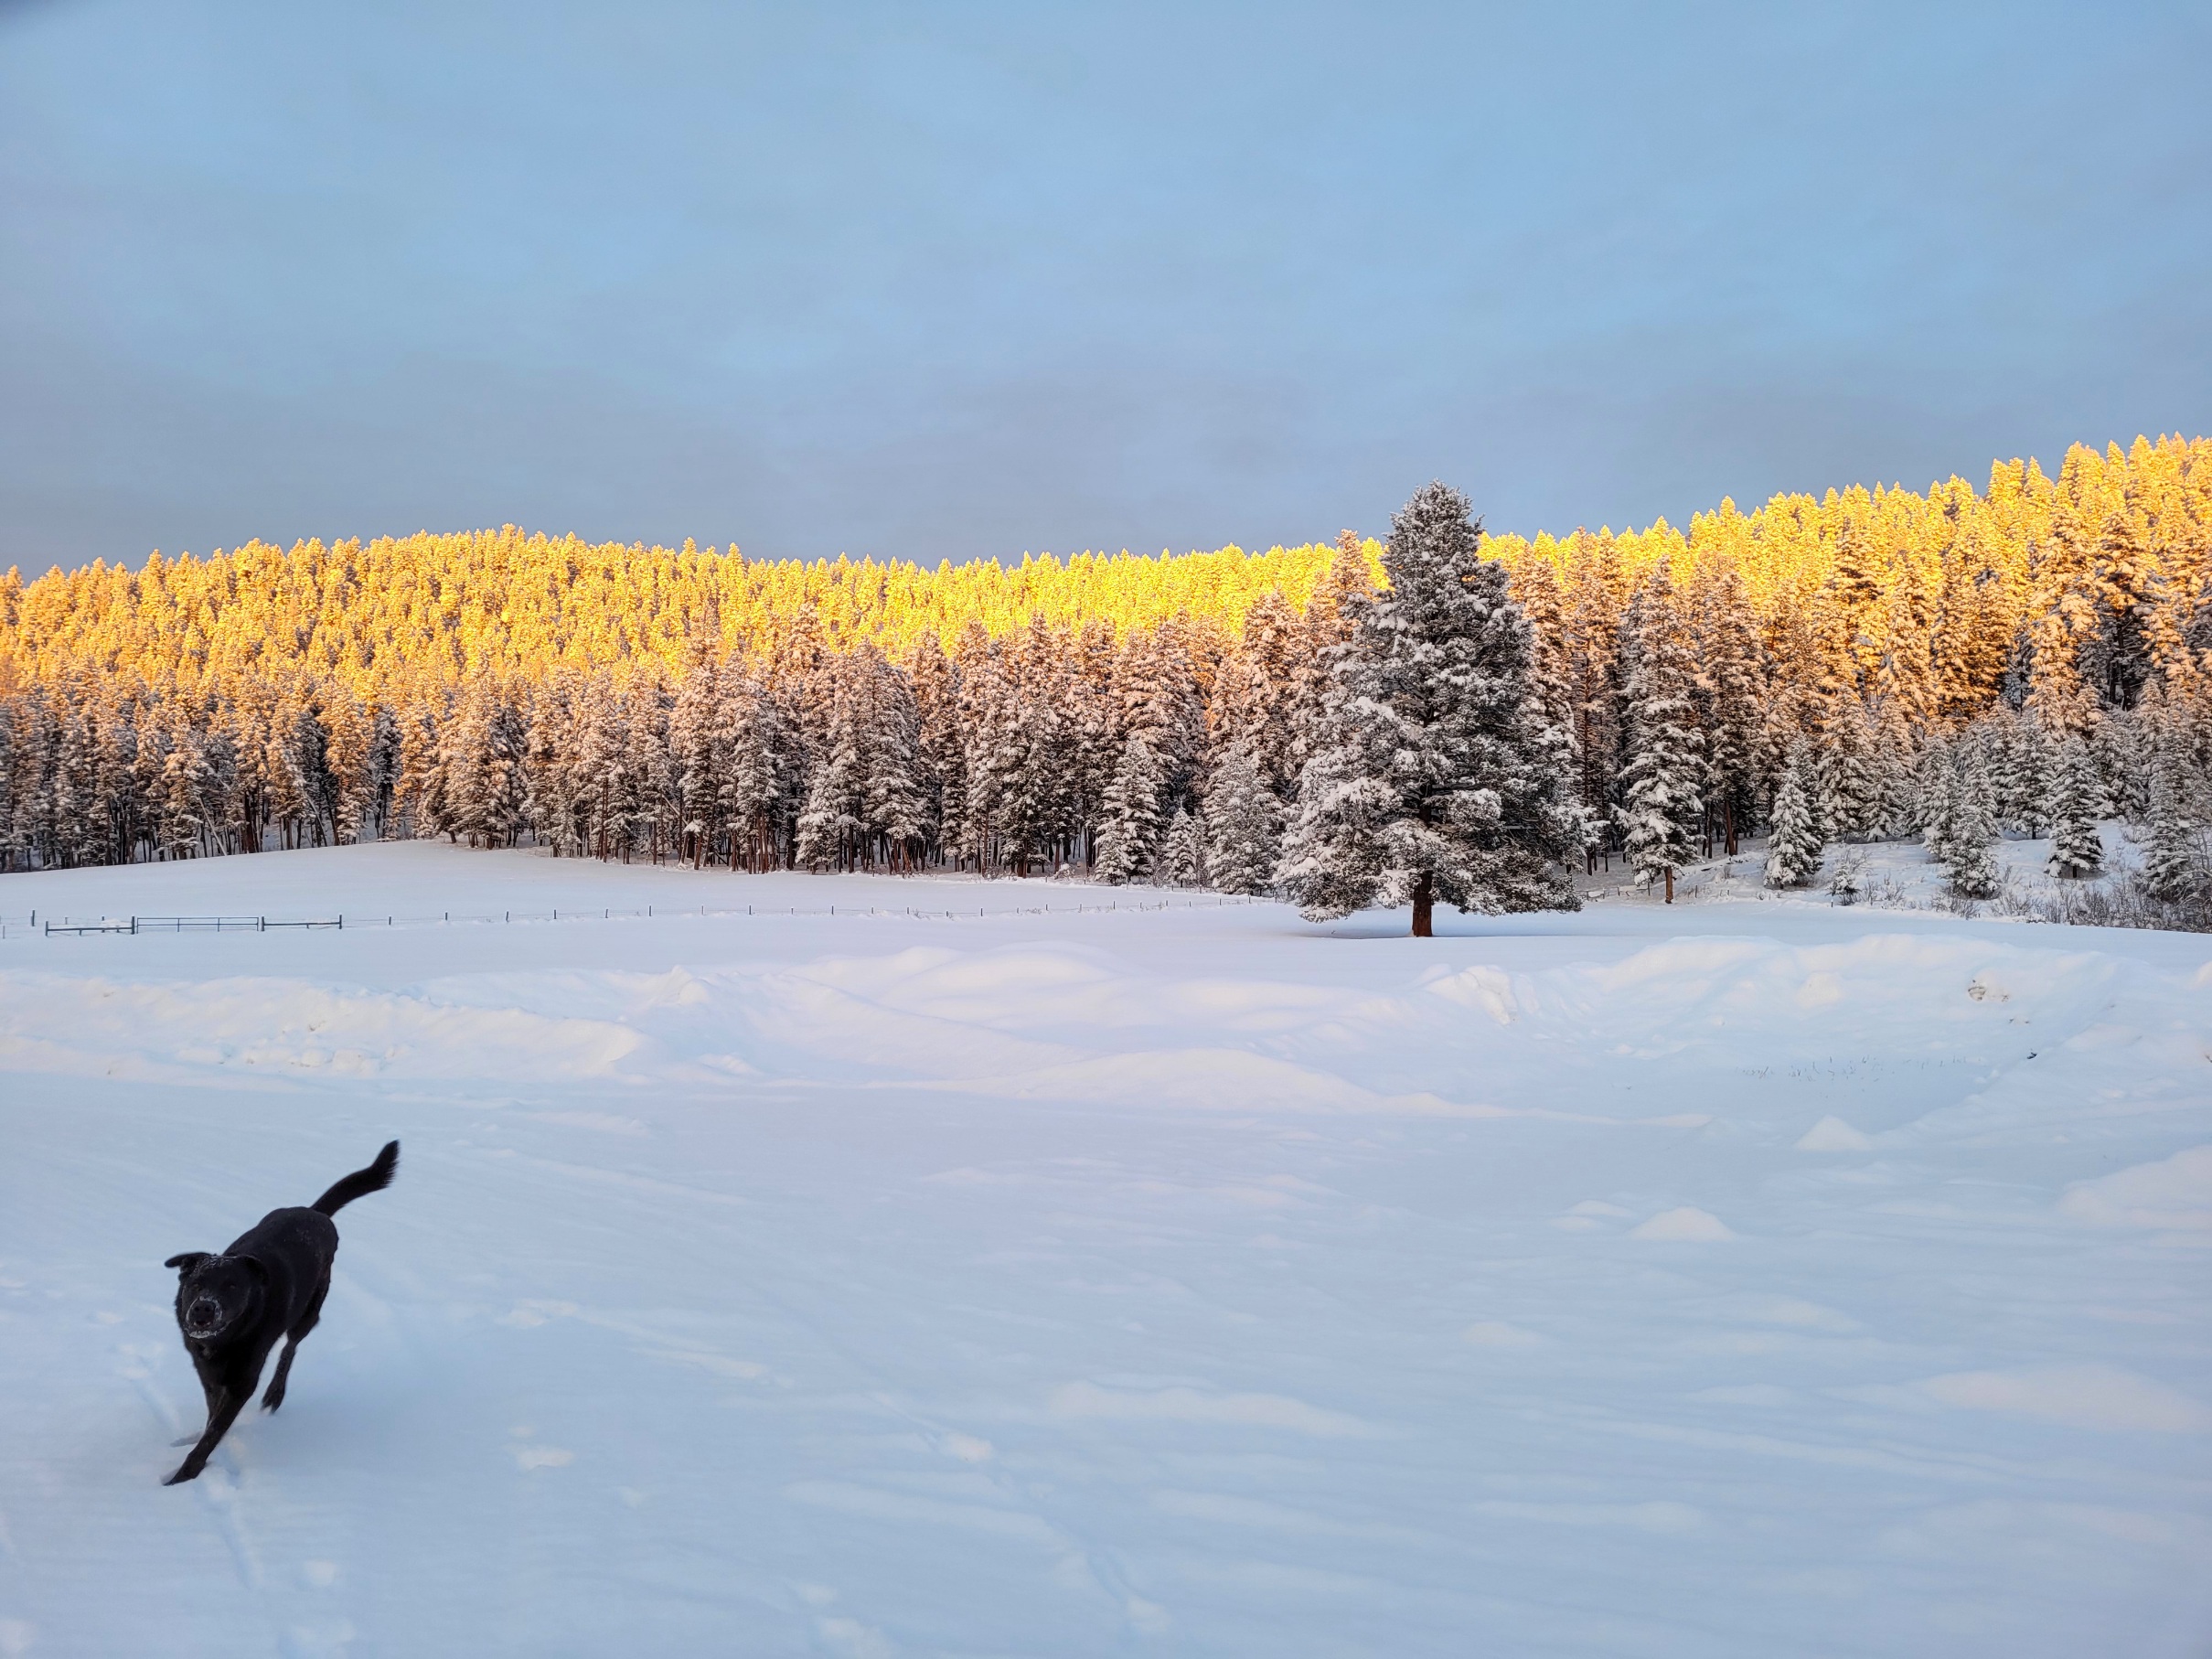 photo of a black dog on a field of snow, with sunset across a line of trees in the background